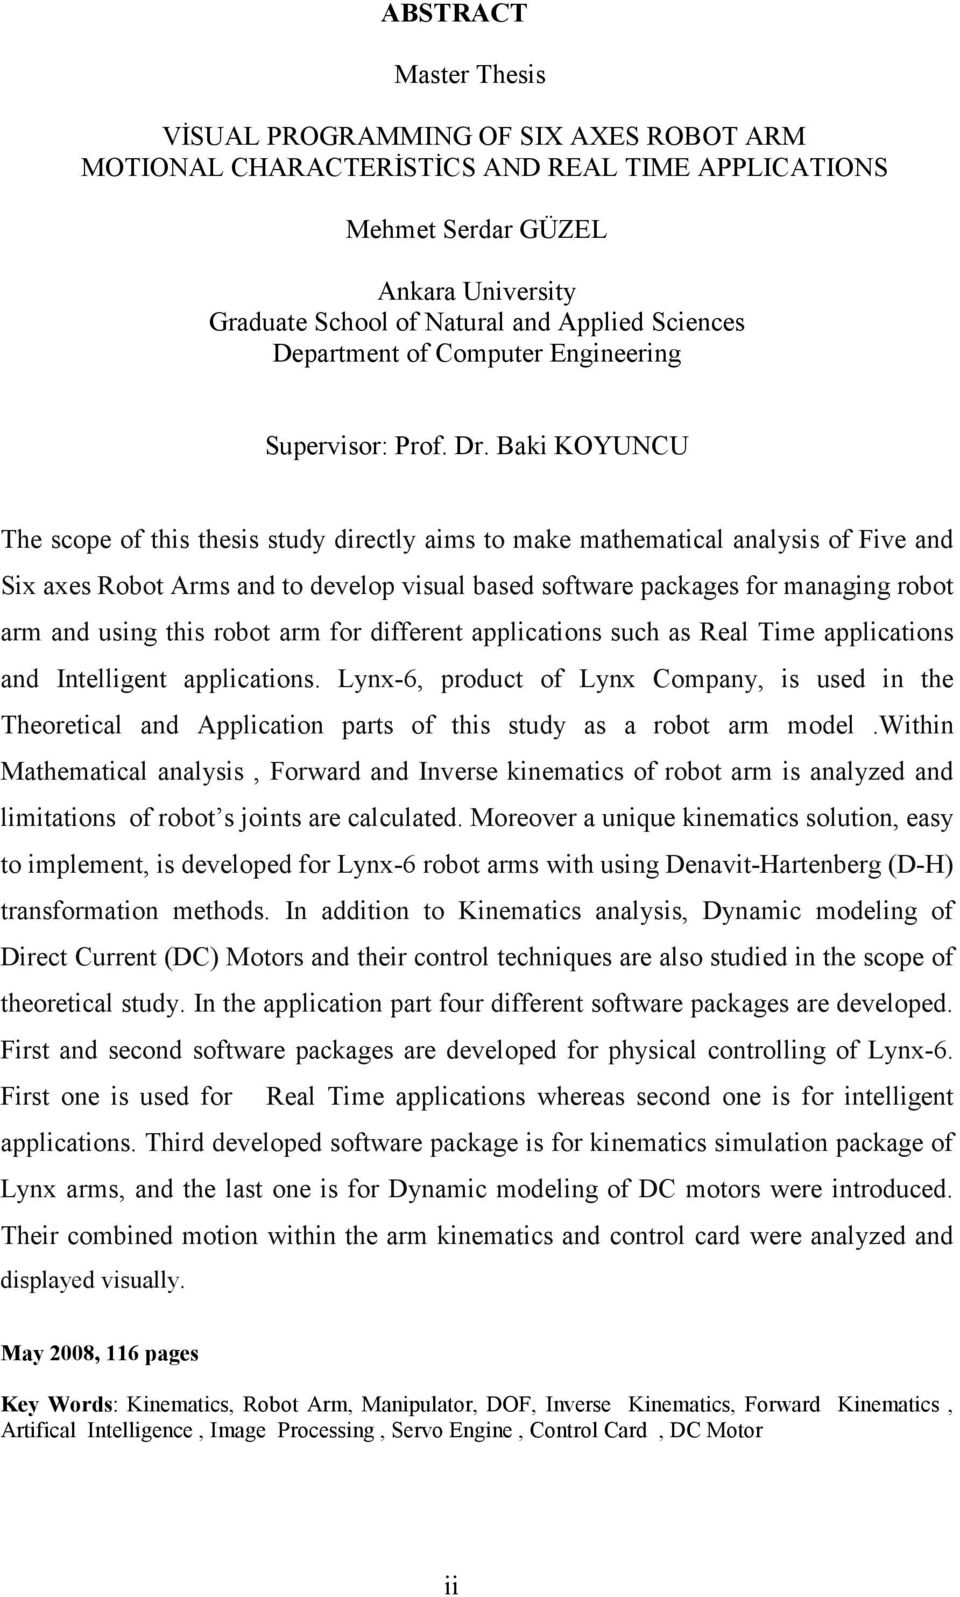 Baki KOYUNCU The scope of this thesis study directly aims to make mathematical analysis of Five and Six axes Robot Arms and to develop visual based software packages for managing robot arm and using